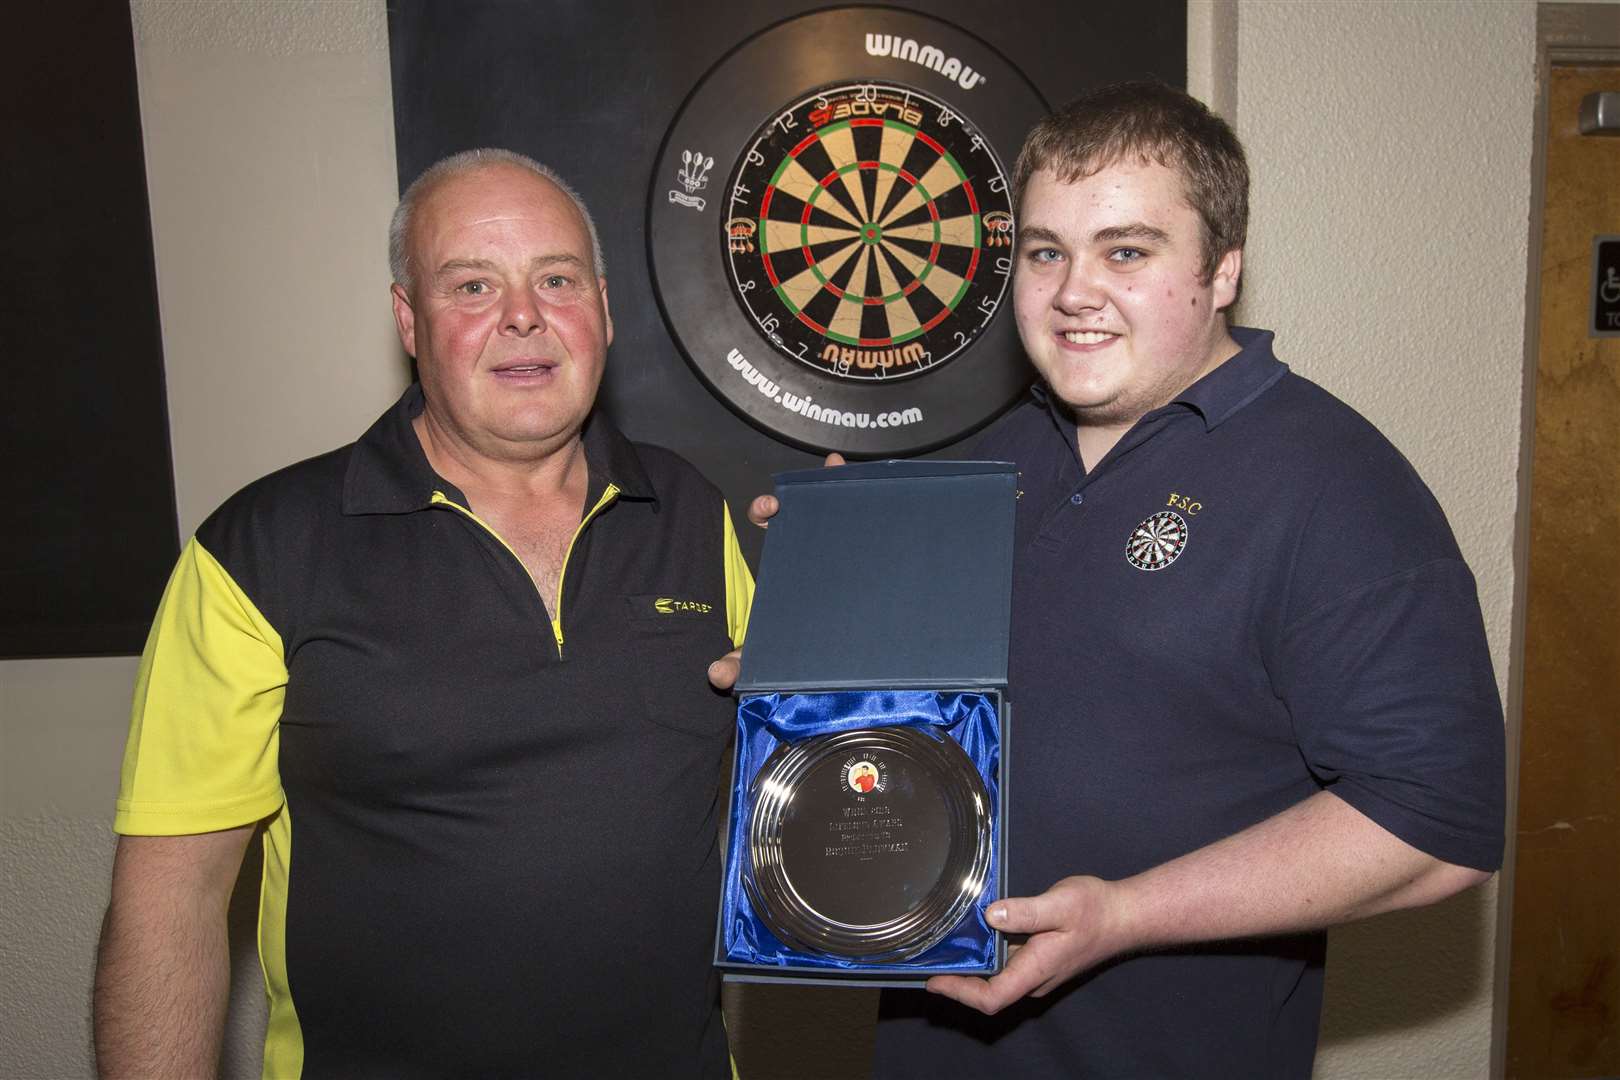 Before the start of Wick and District Darts League's new season, Ronnie Plowman (left) was presented with a lifetime award for his dedication to the sport. The presentation was made by Martin Nicolson. Ronnie has been playing darts for 40 years, having begun as part of the Nethercliffe team. He now plays for Seaforth Club. Cath Begg, of Keiss, received a similar award, but she was not present to receive her trophy. Picture: Robert MacDonald / Northern Studios